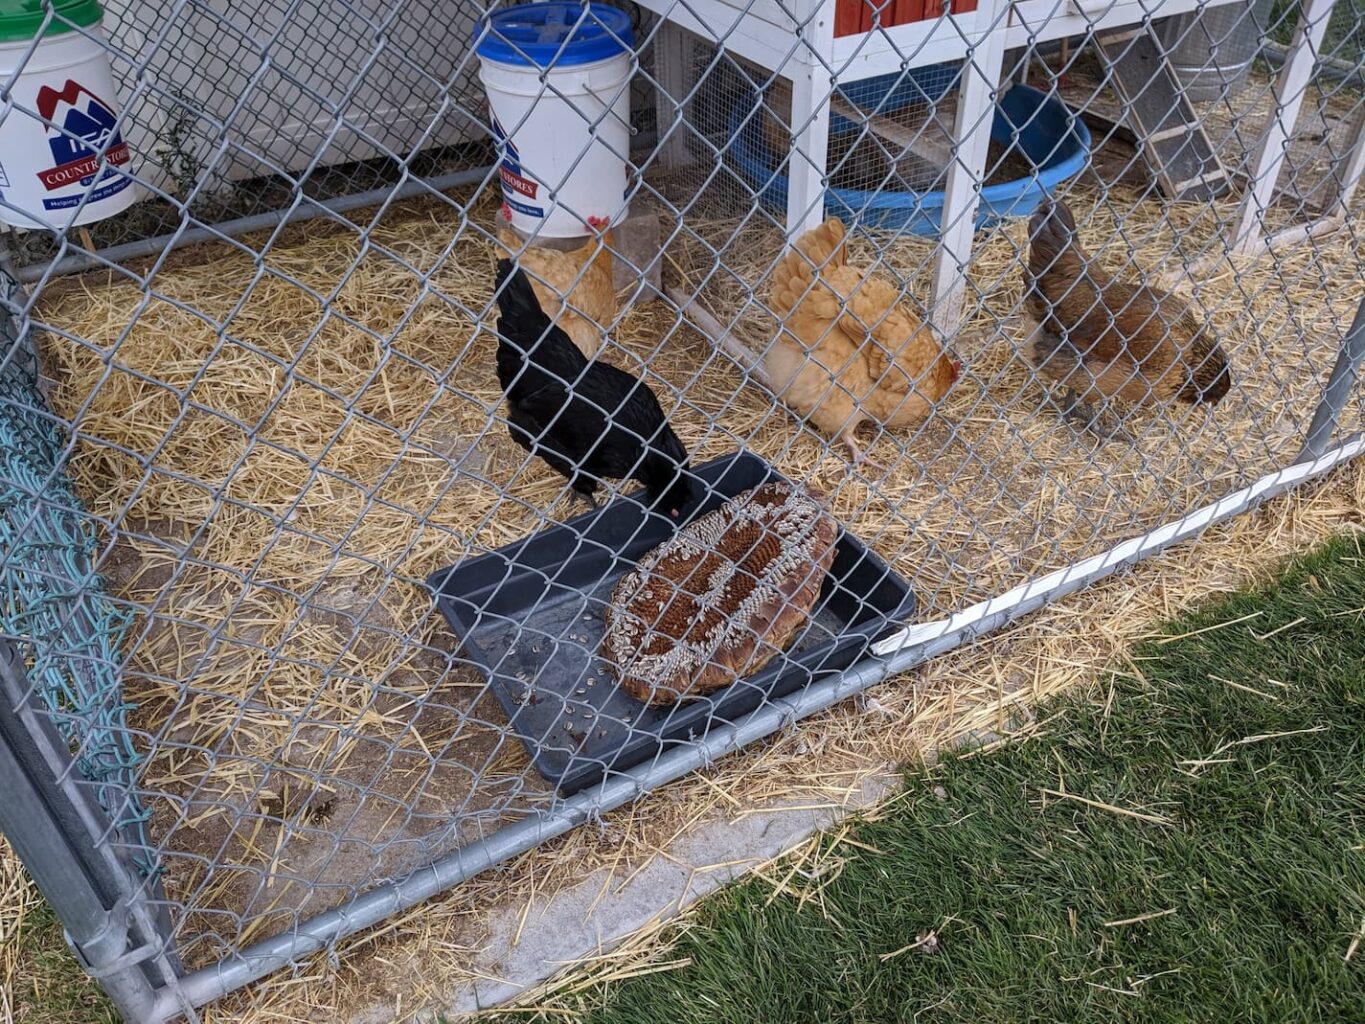 An image of chickens enjoying sunflower seeds direct from the source.